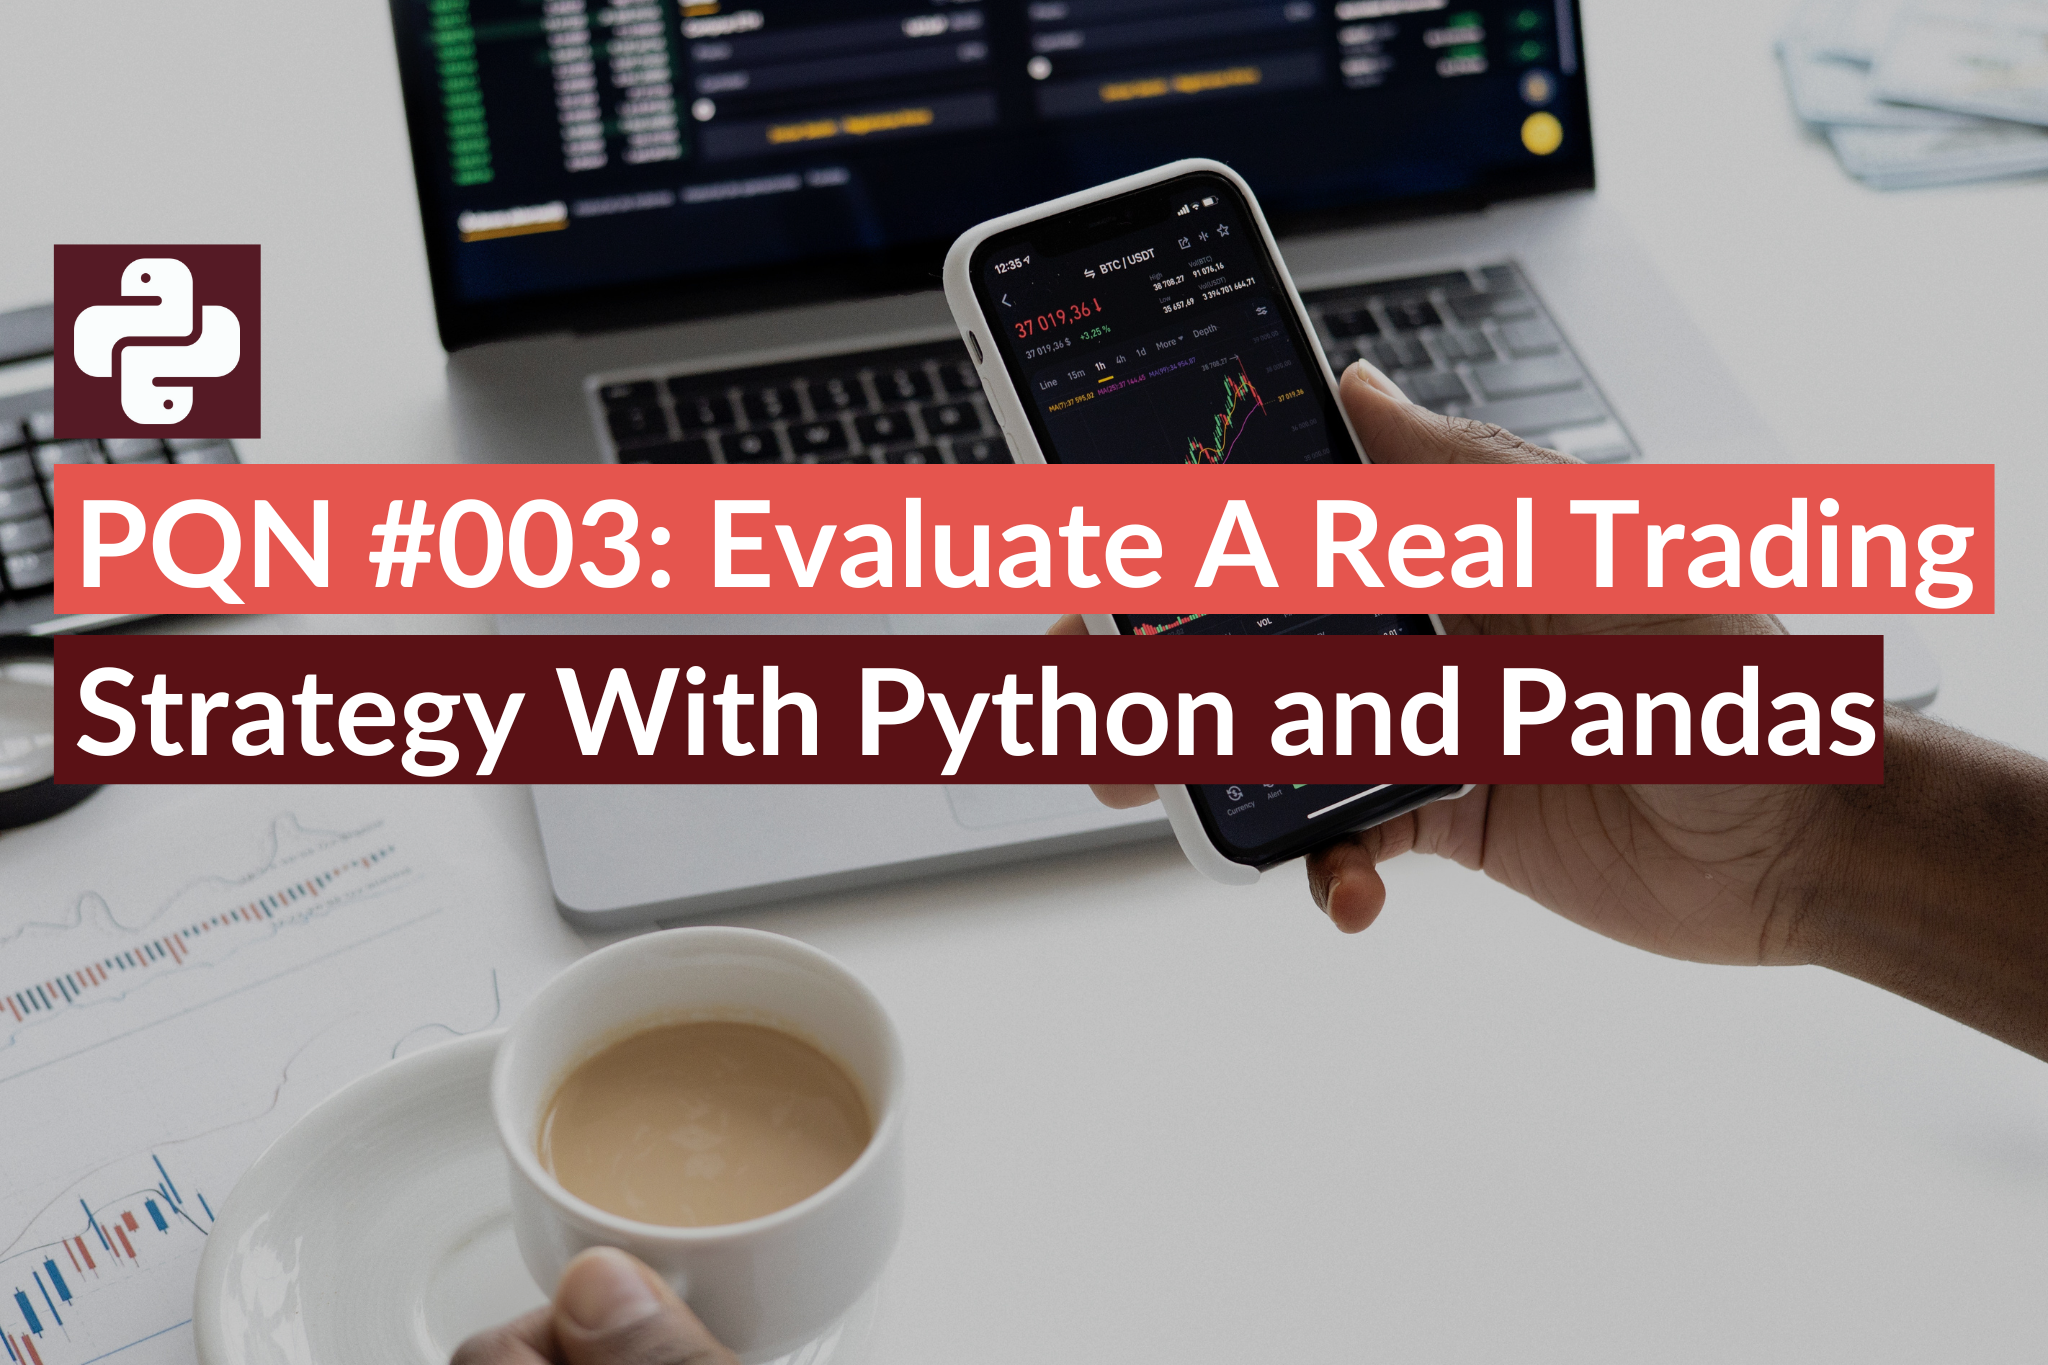 PQN #003: Evaluate A Real Trading Strategy With Python and Pandas